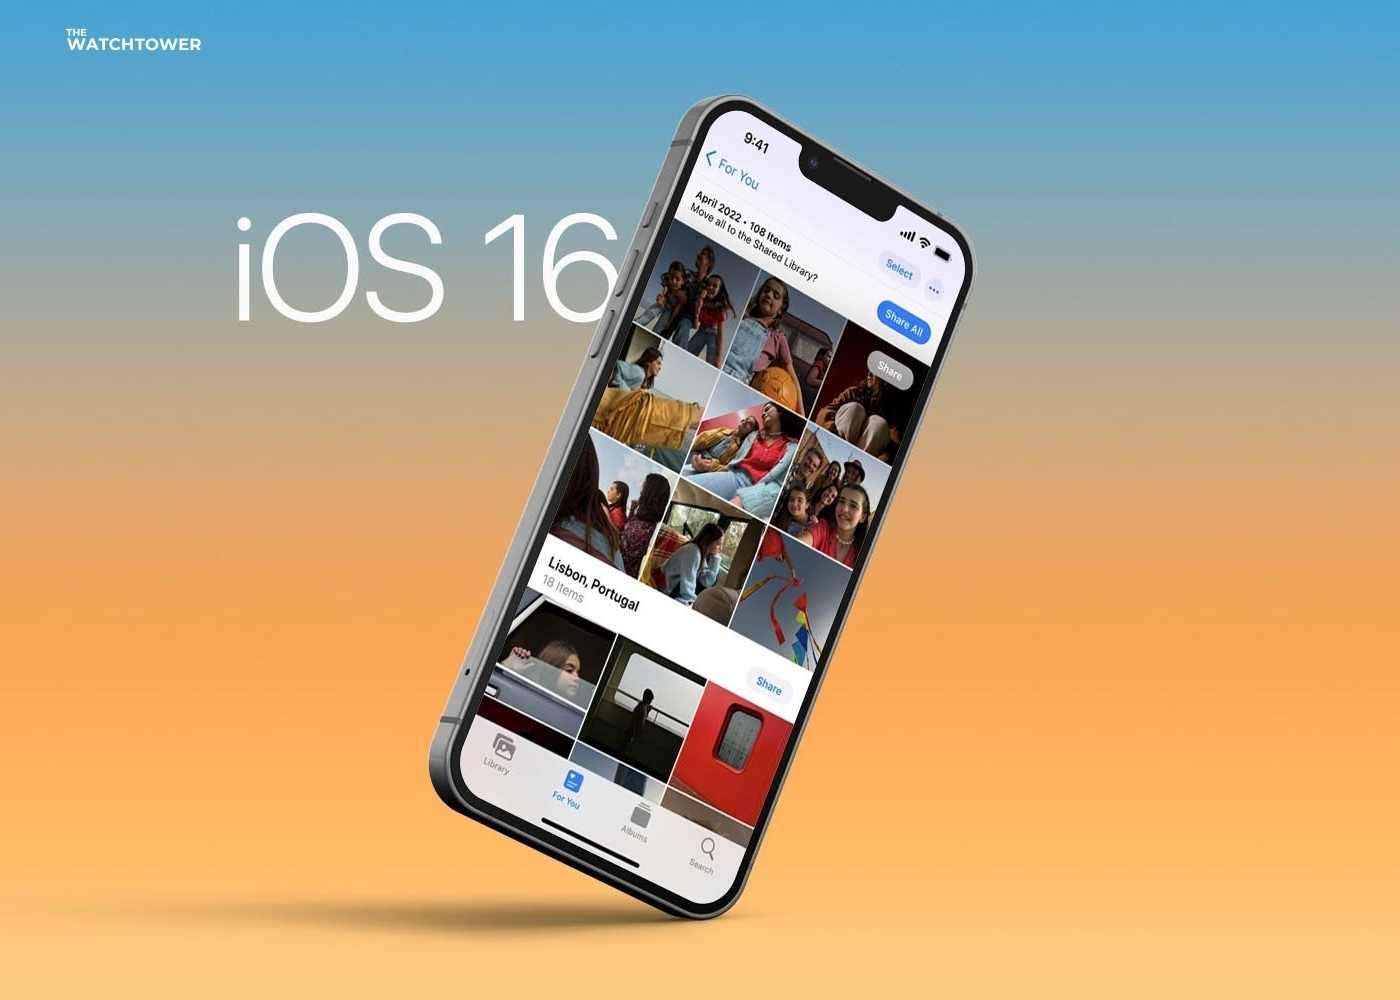 How the Latest iOS 16 From Apple Can Make Your Life Better